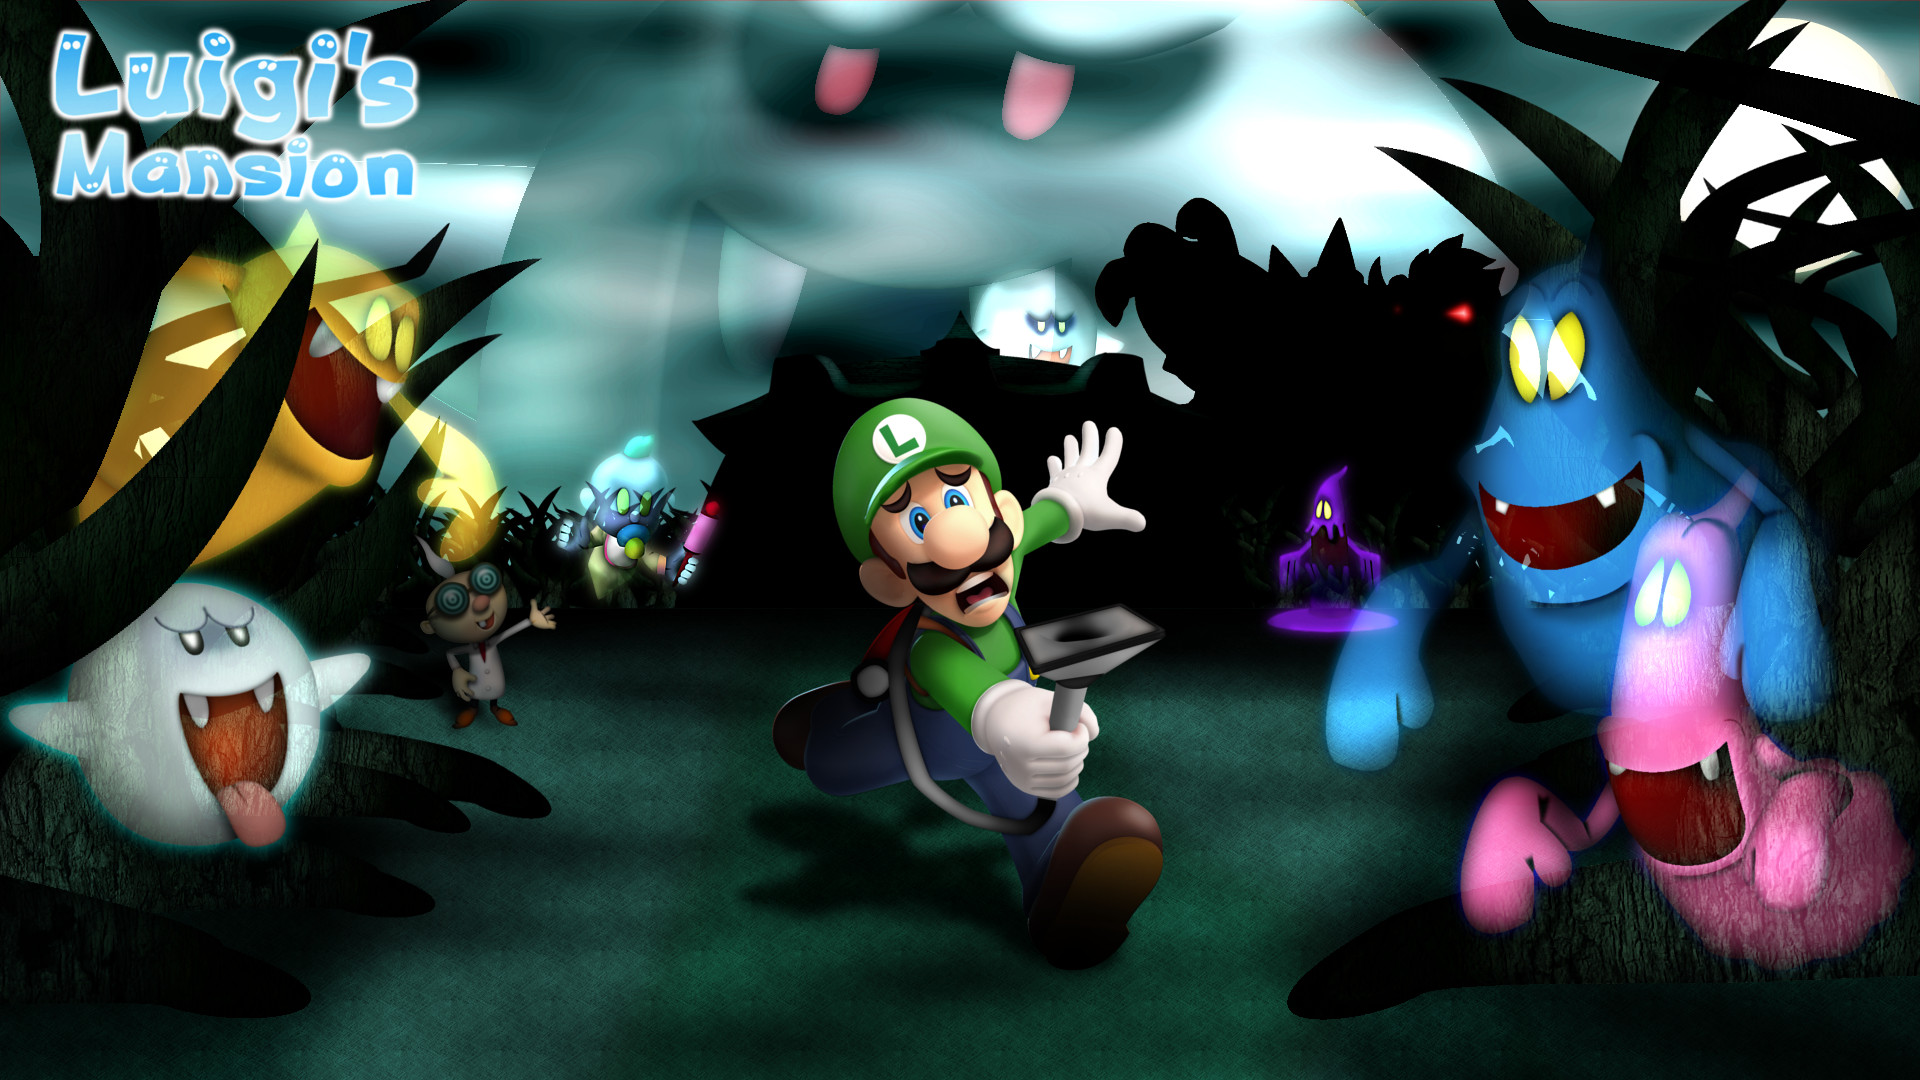 1920x1080 Luigi's Mansion Wallpapers Backgrounds - Wallpaper Abyss